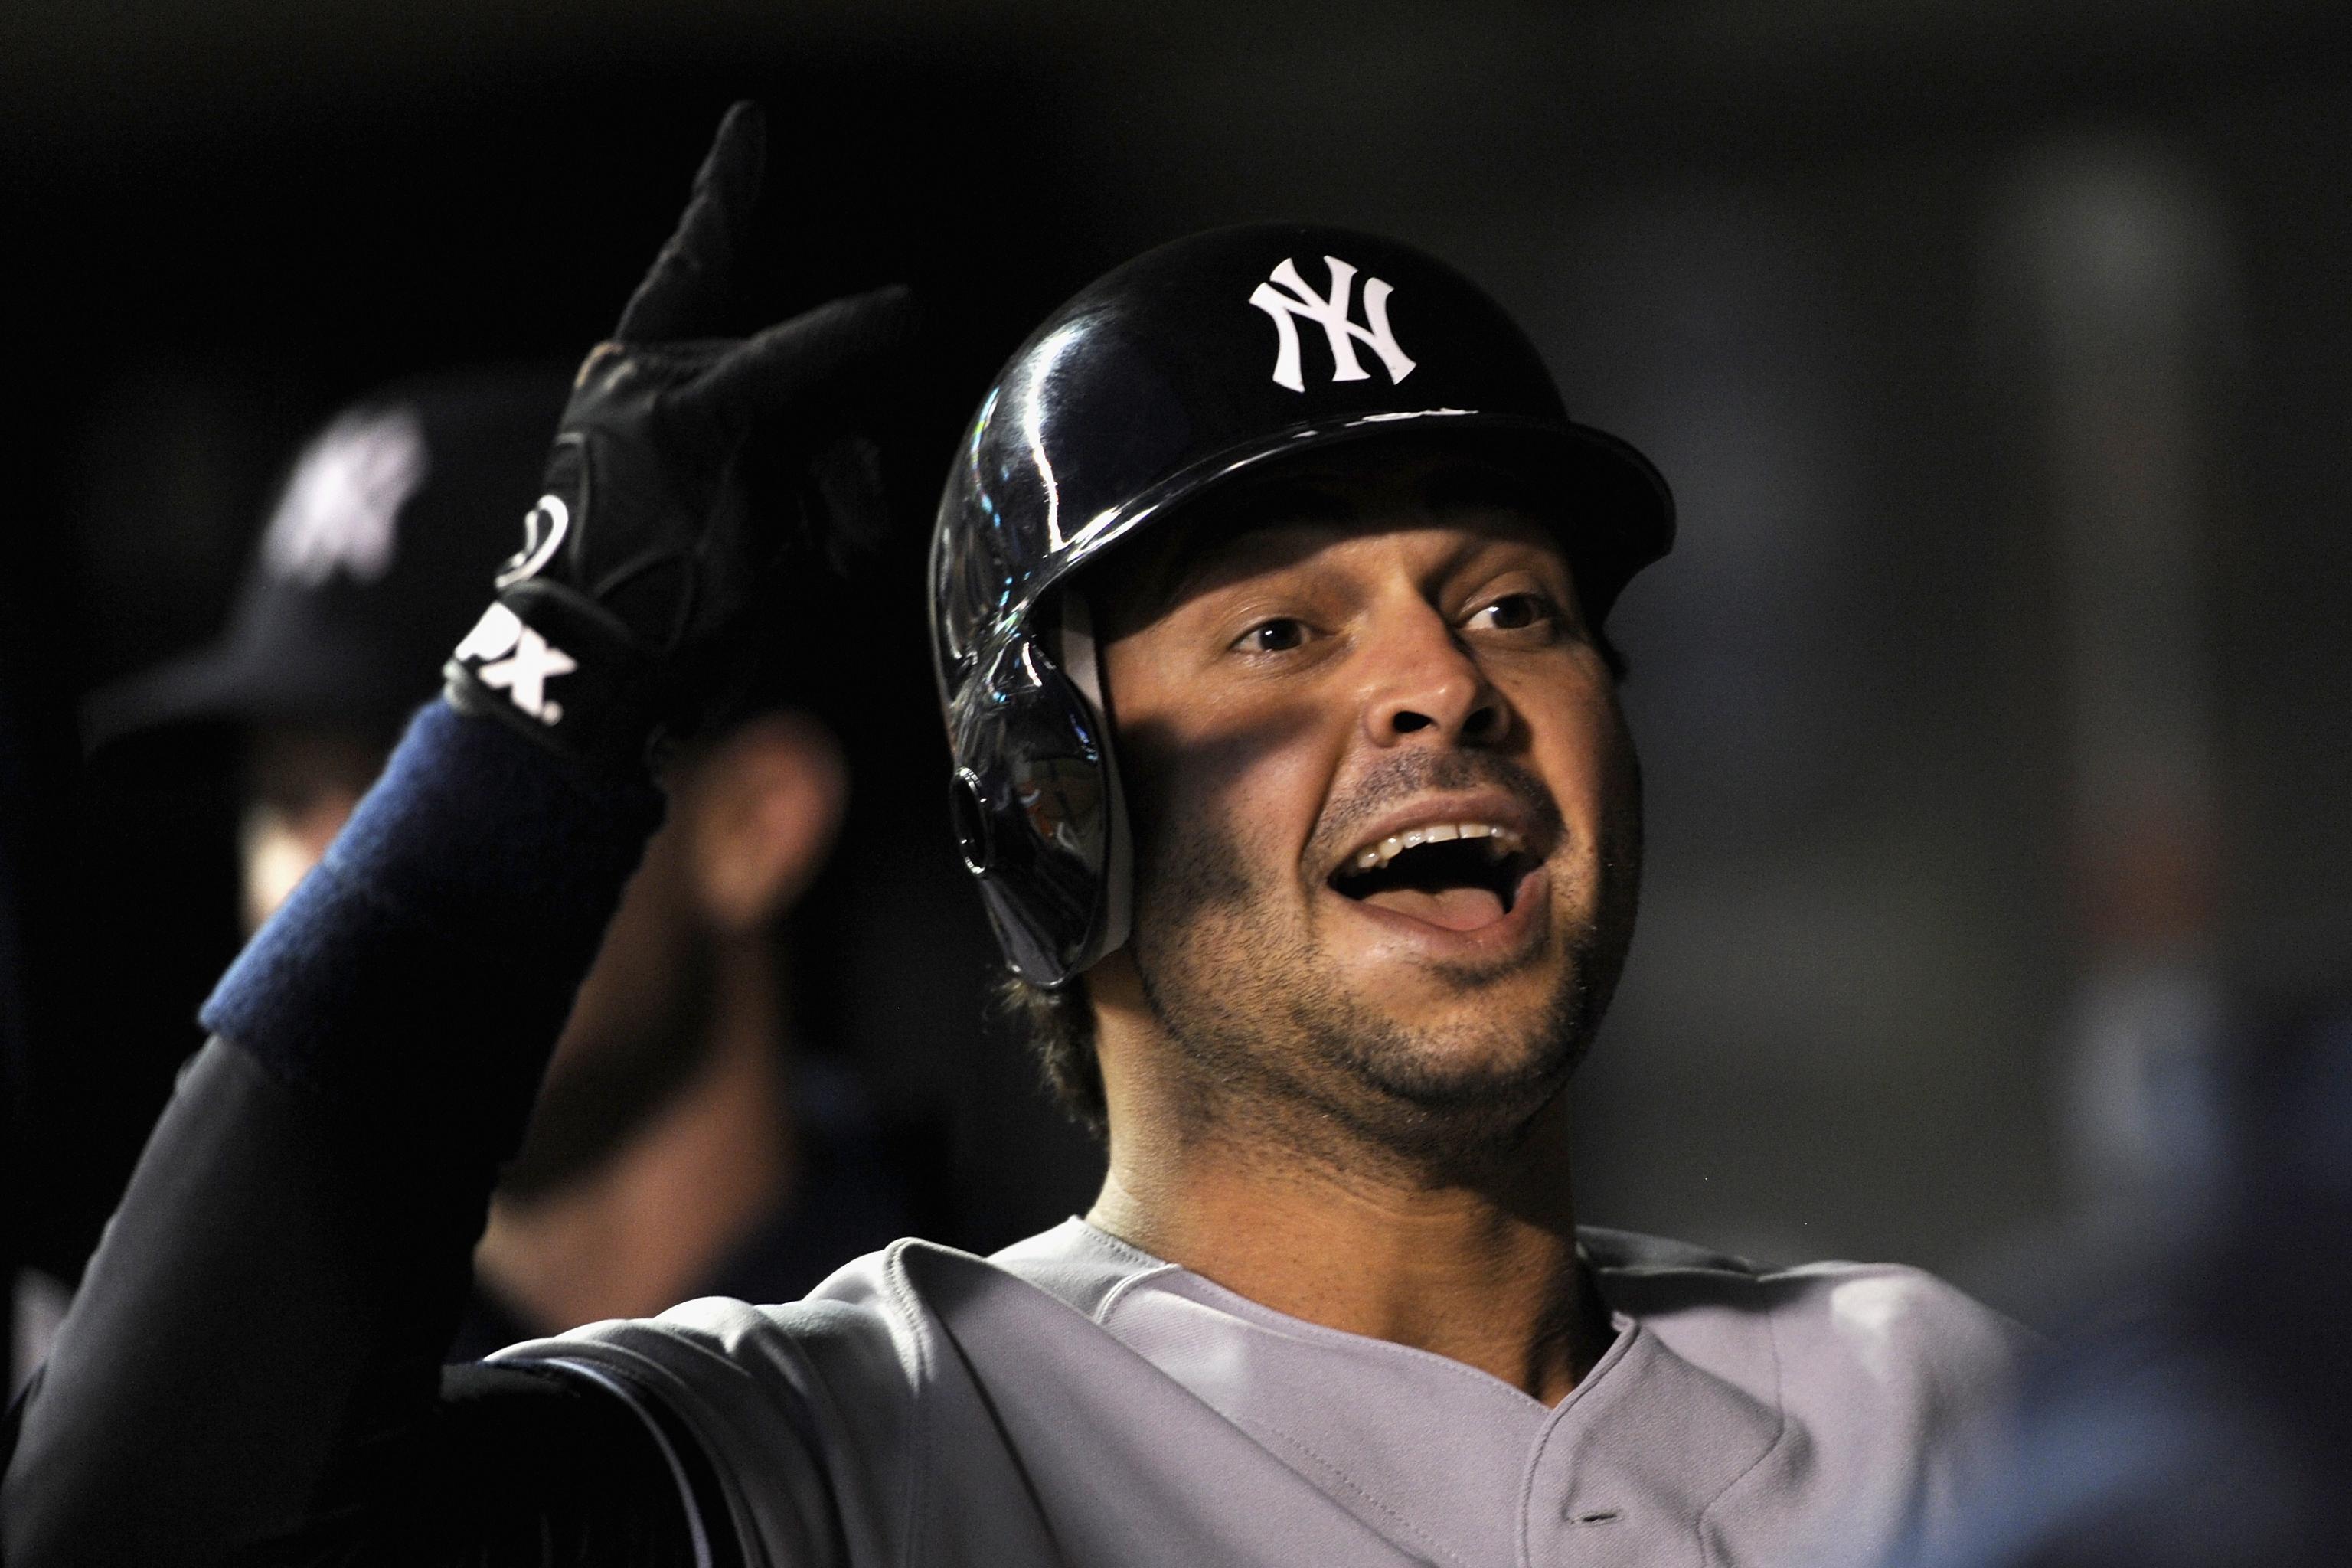 The Yankees Future is in Good Hands (with Nick Swisher)